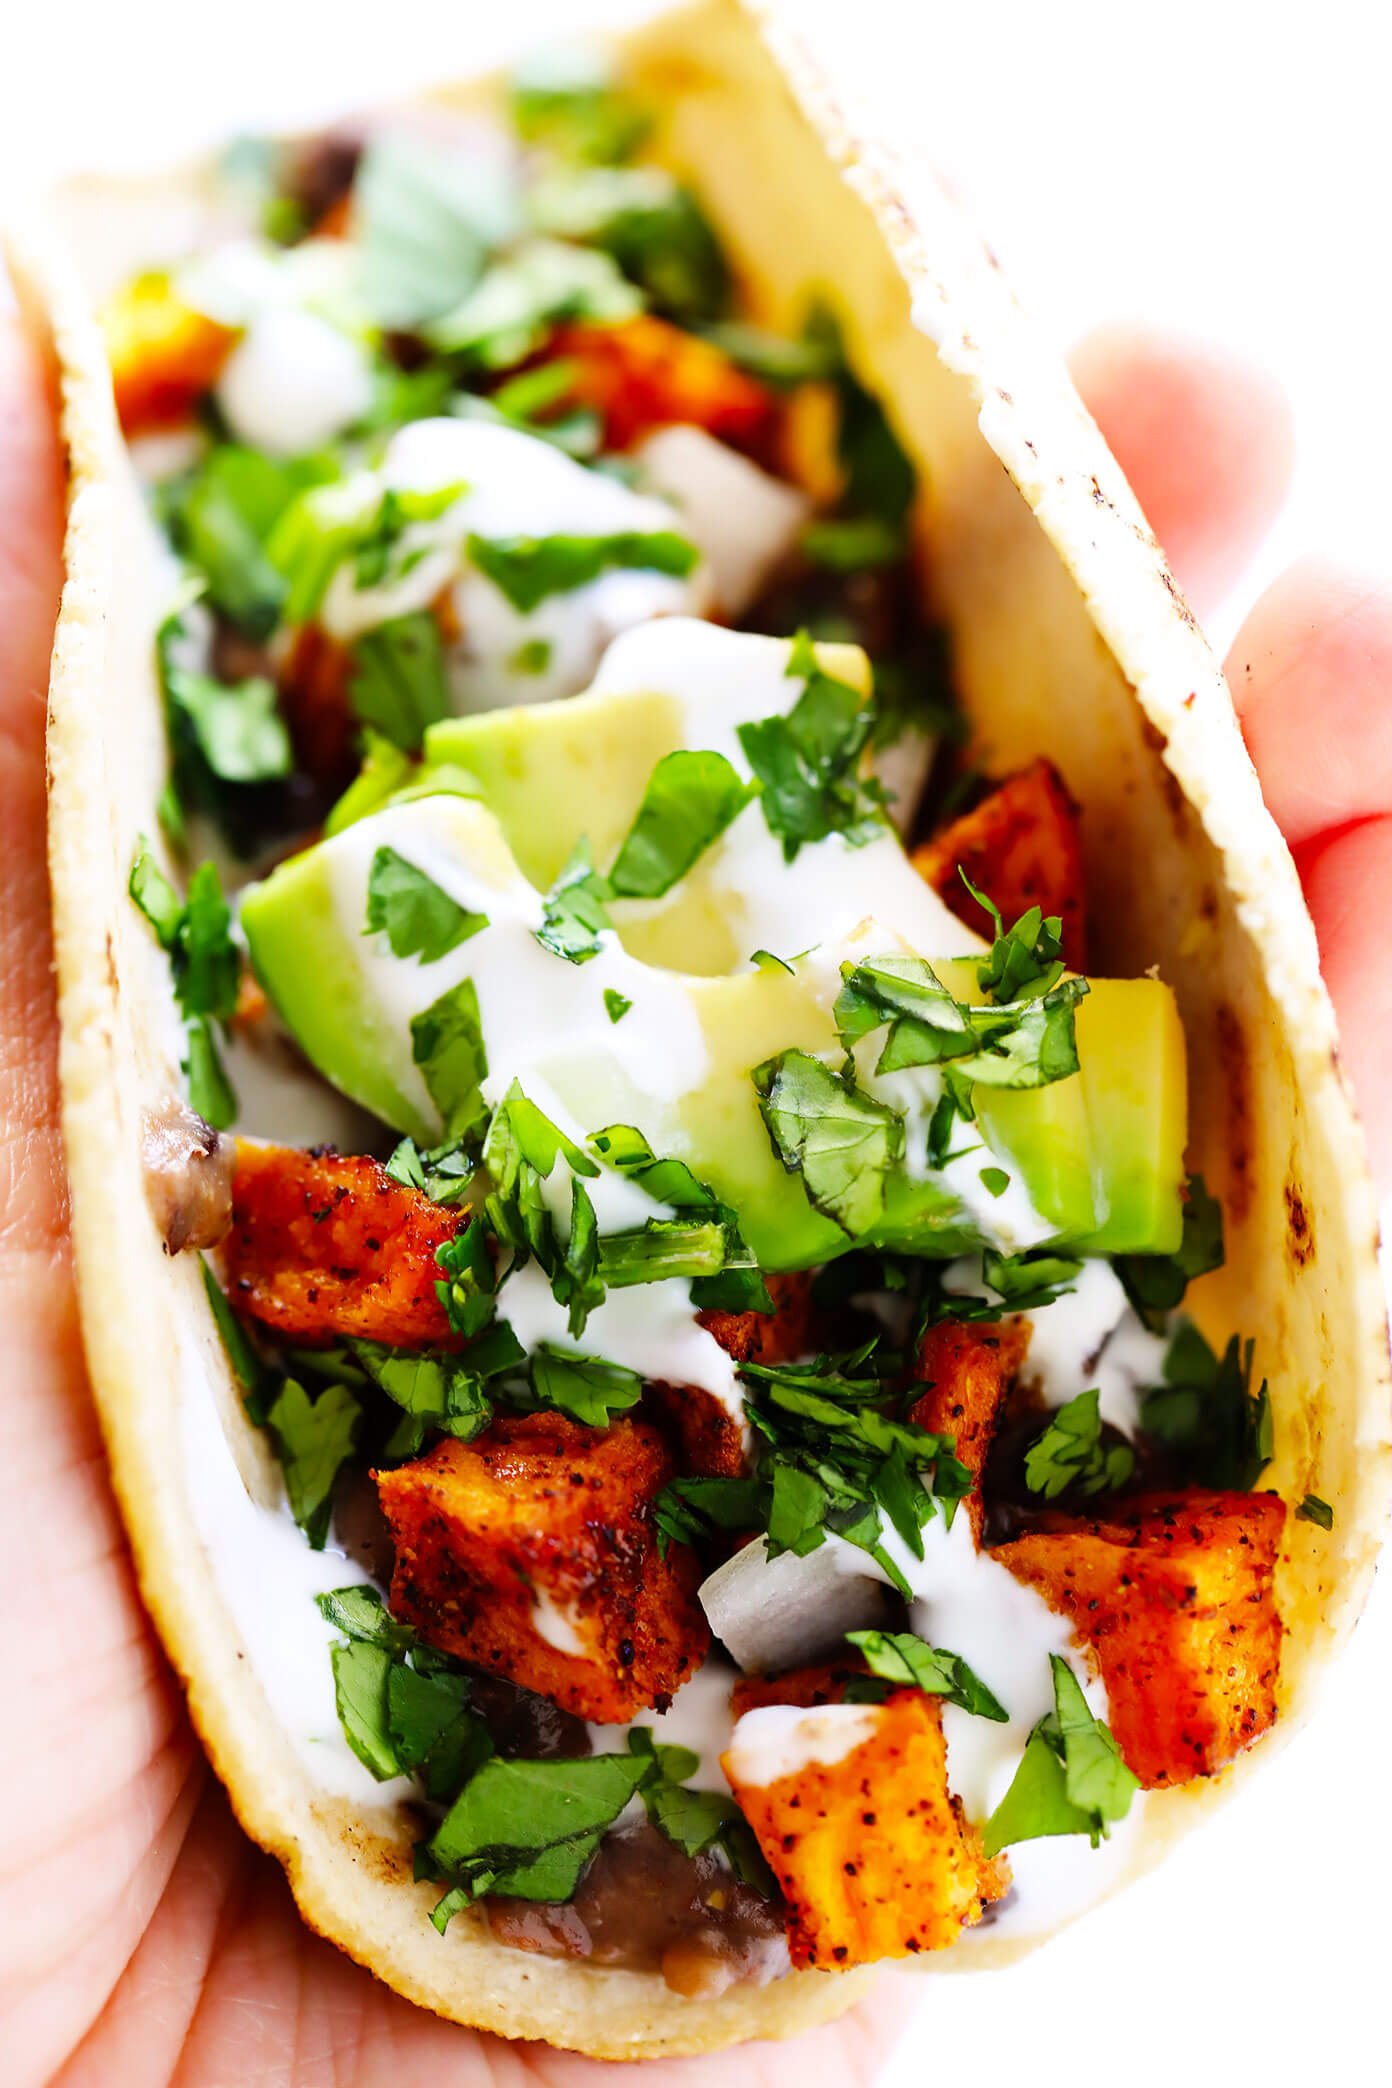 Sweet Potato Tacos with Refried Beans, Avocado and Lime Crema